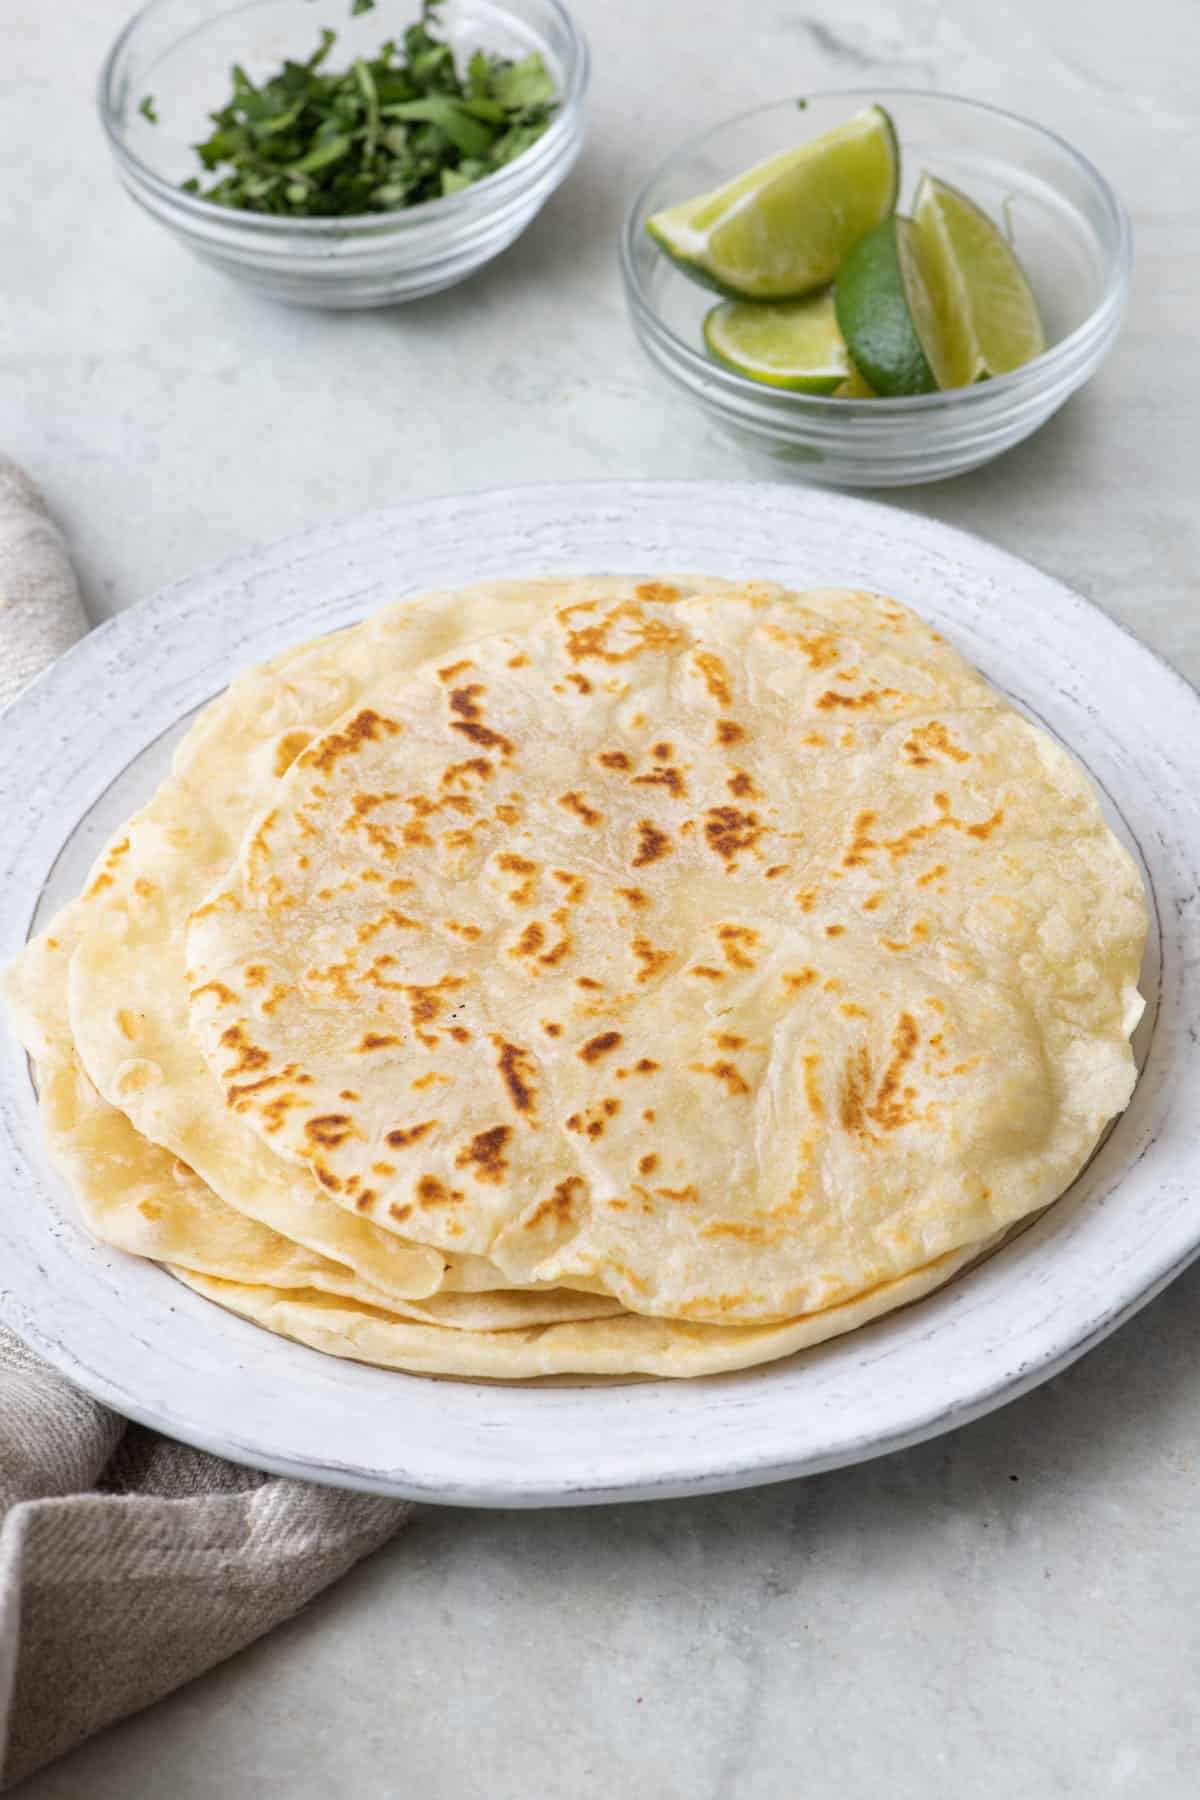 Stack of homemade flour tortillas on a plate with small dishes of lime wedges and chopped cilantro nearby.